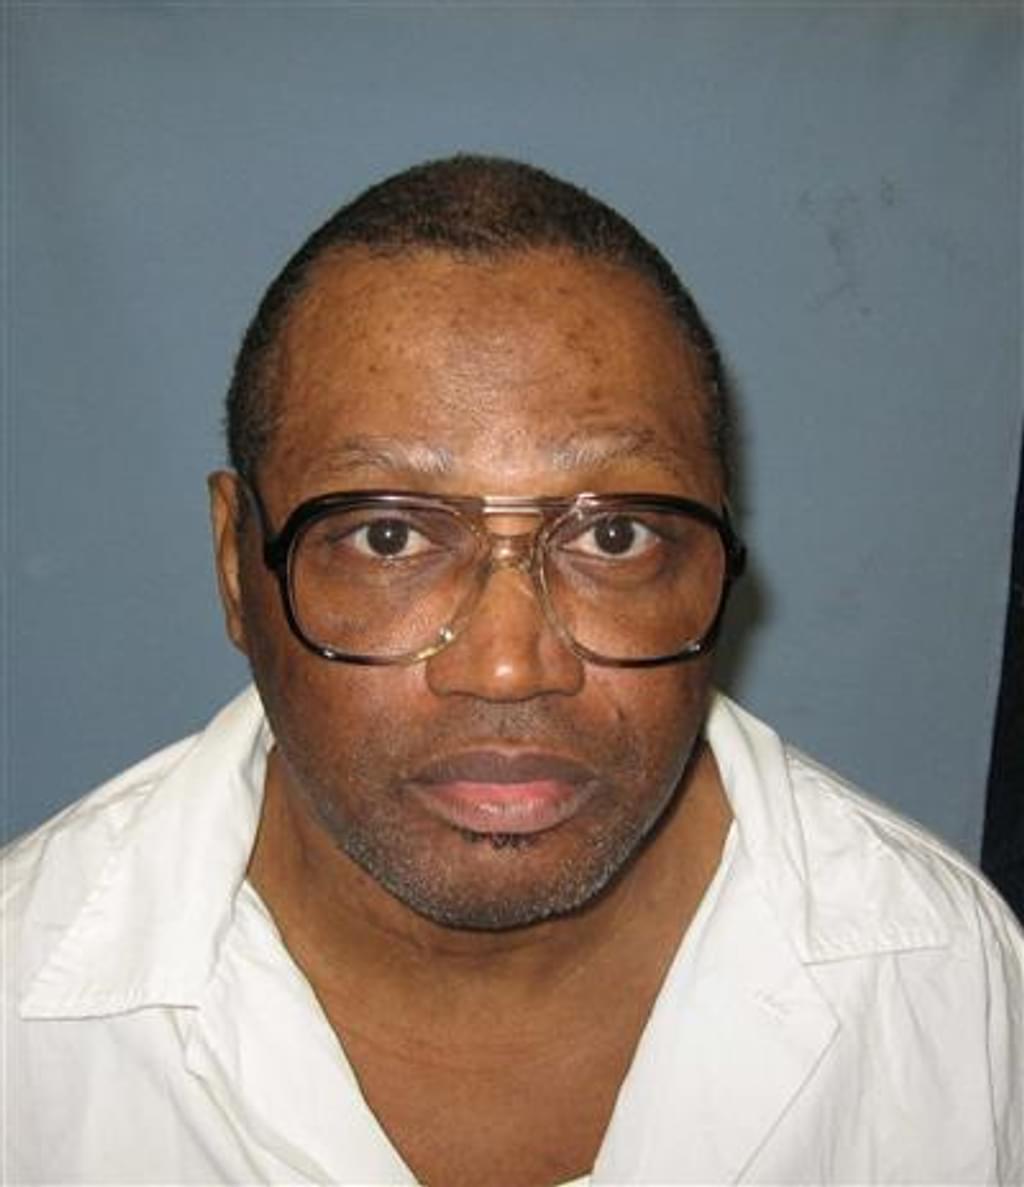 Alabama Prepares to Execute 65-Year-Old Mentally Ill Prisoner Disabled by Several Strokes